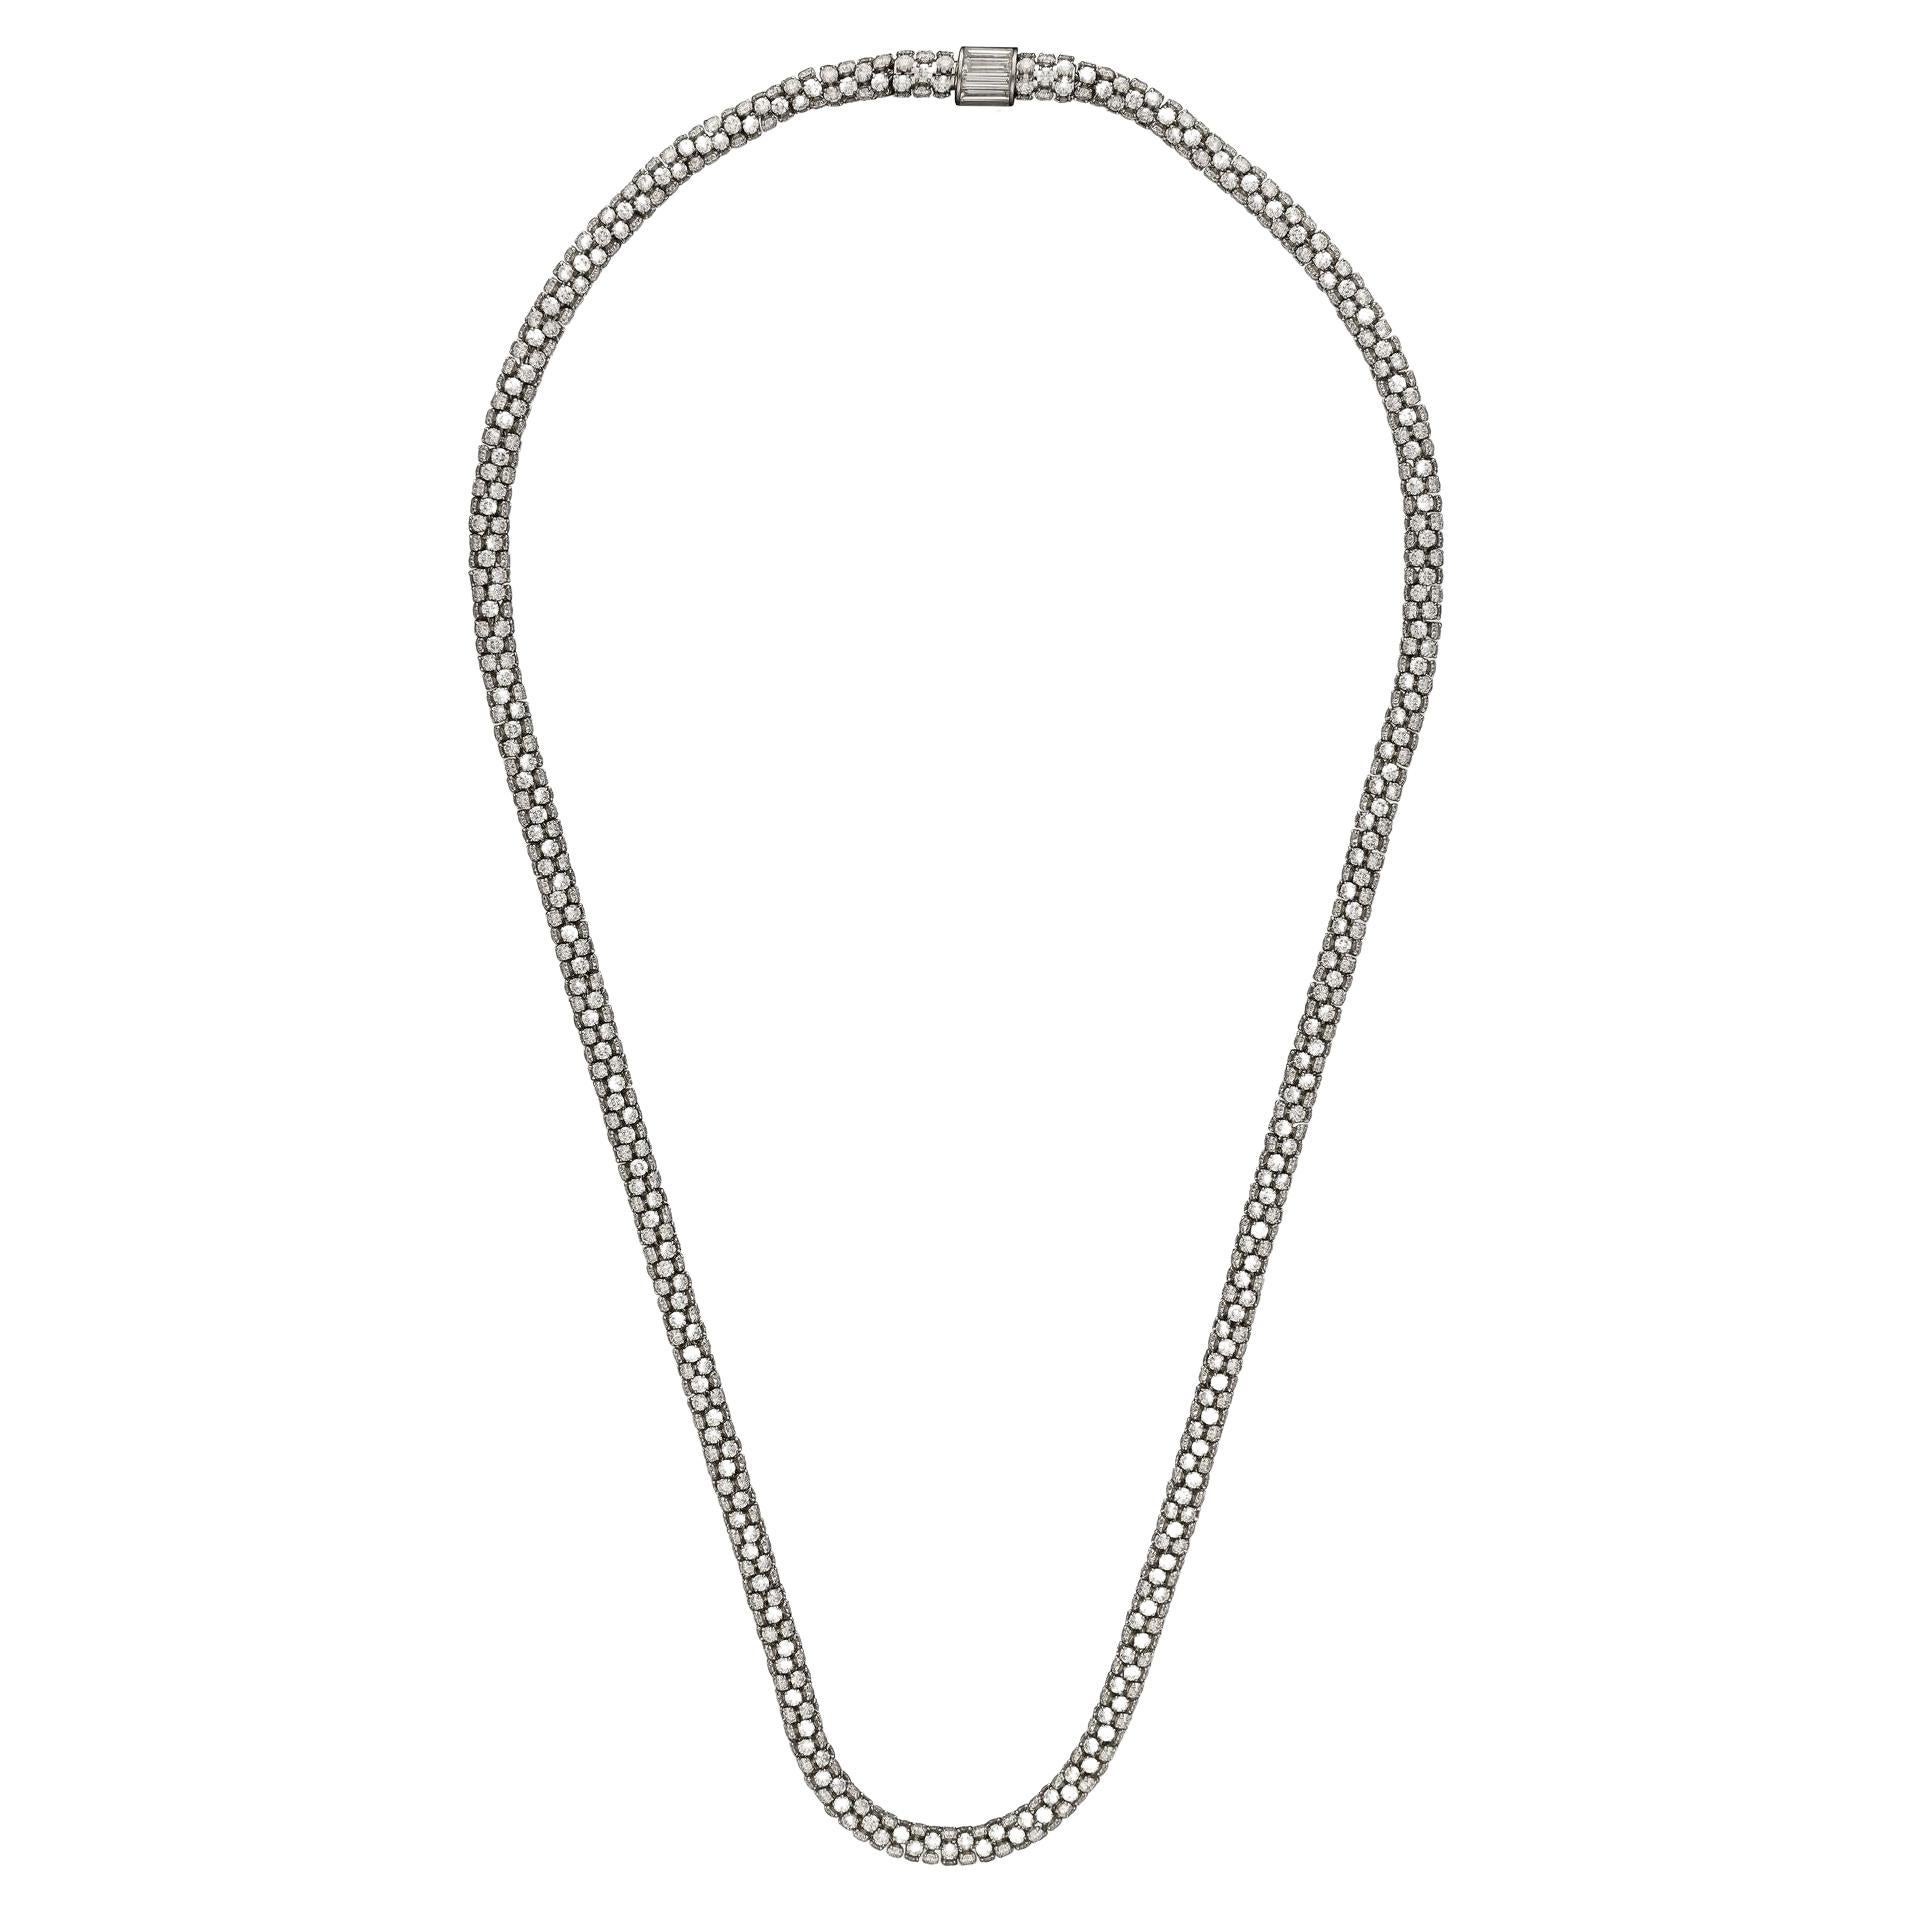 Hancocks Contemporary Beautiful Diamond And Platinum Chain Necklace 25cts For Sale